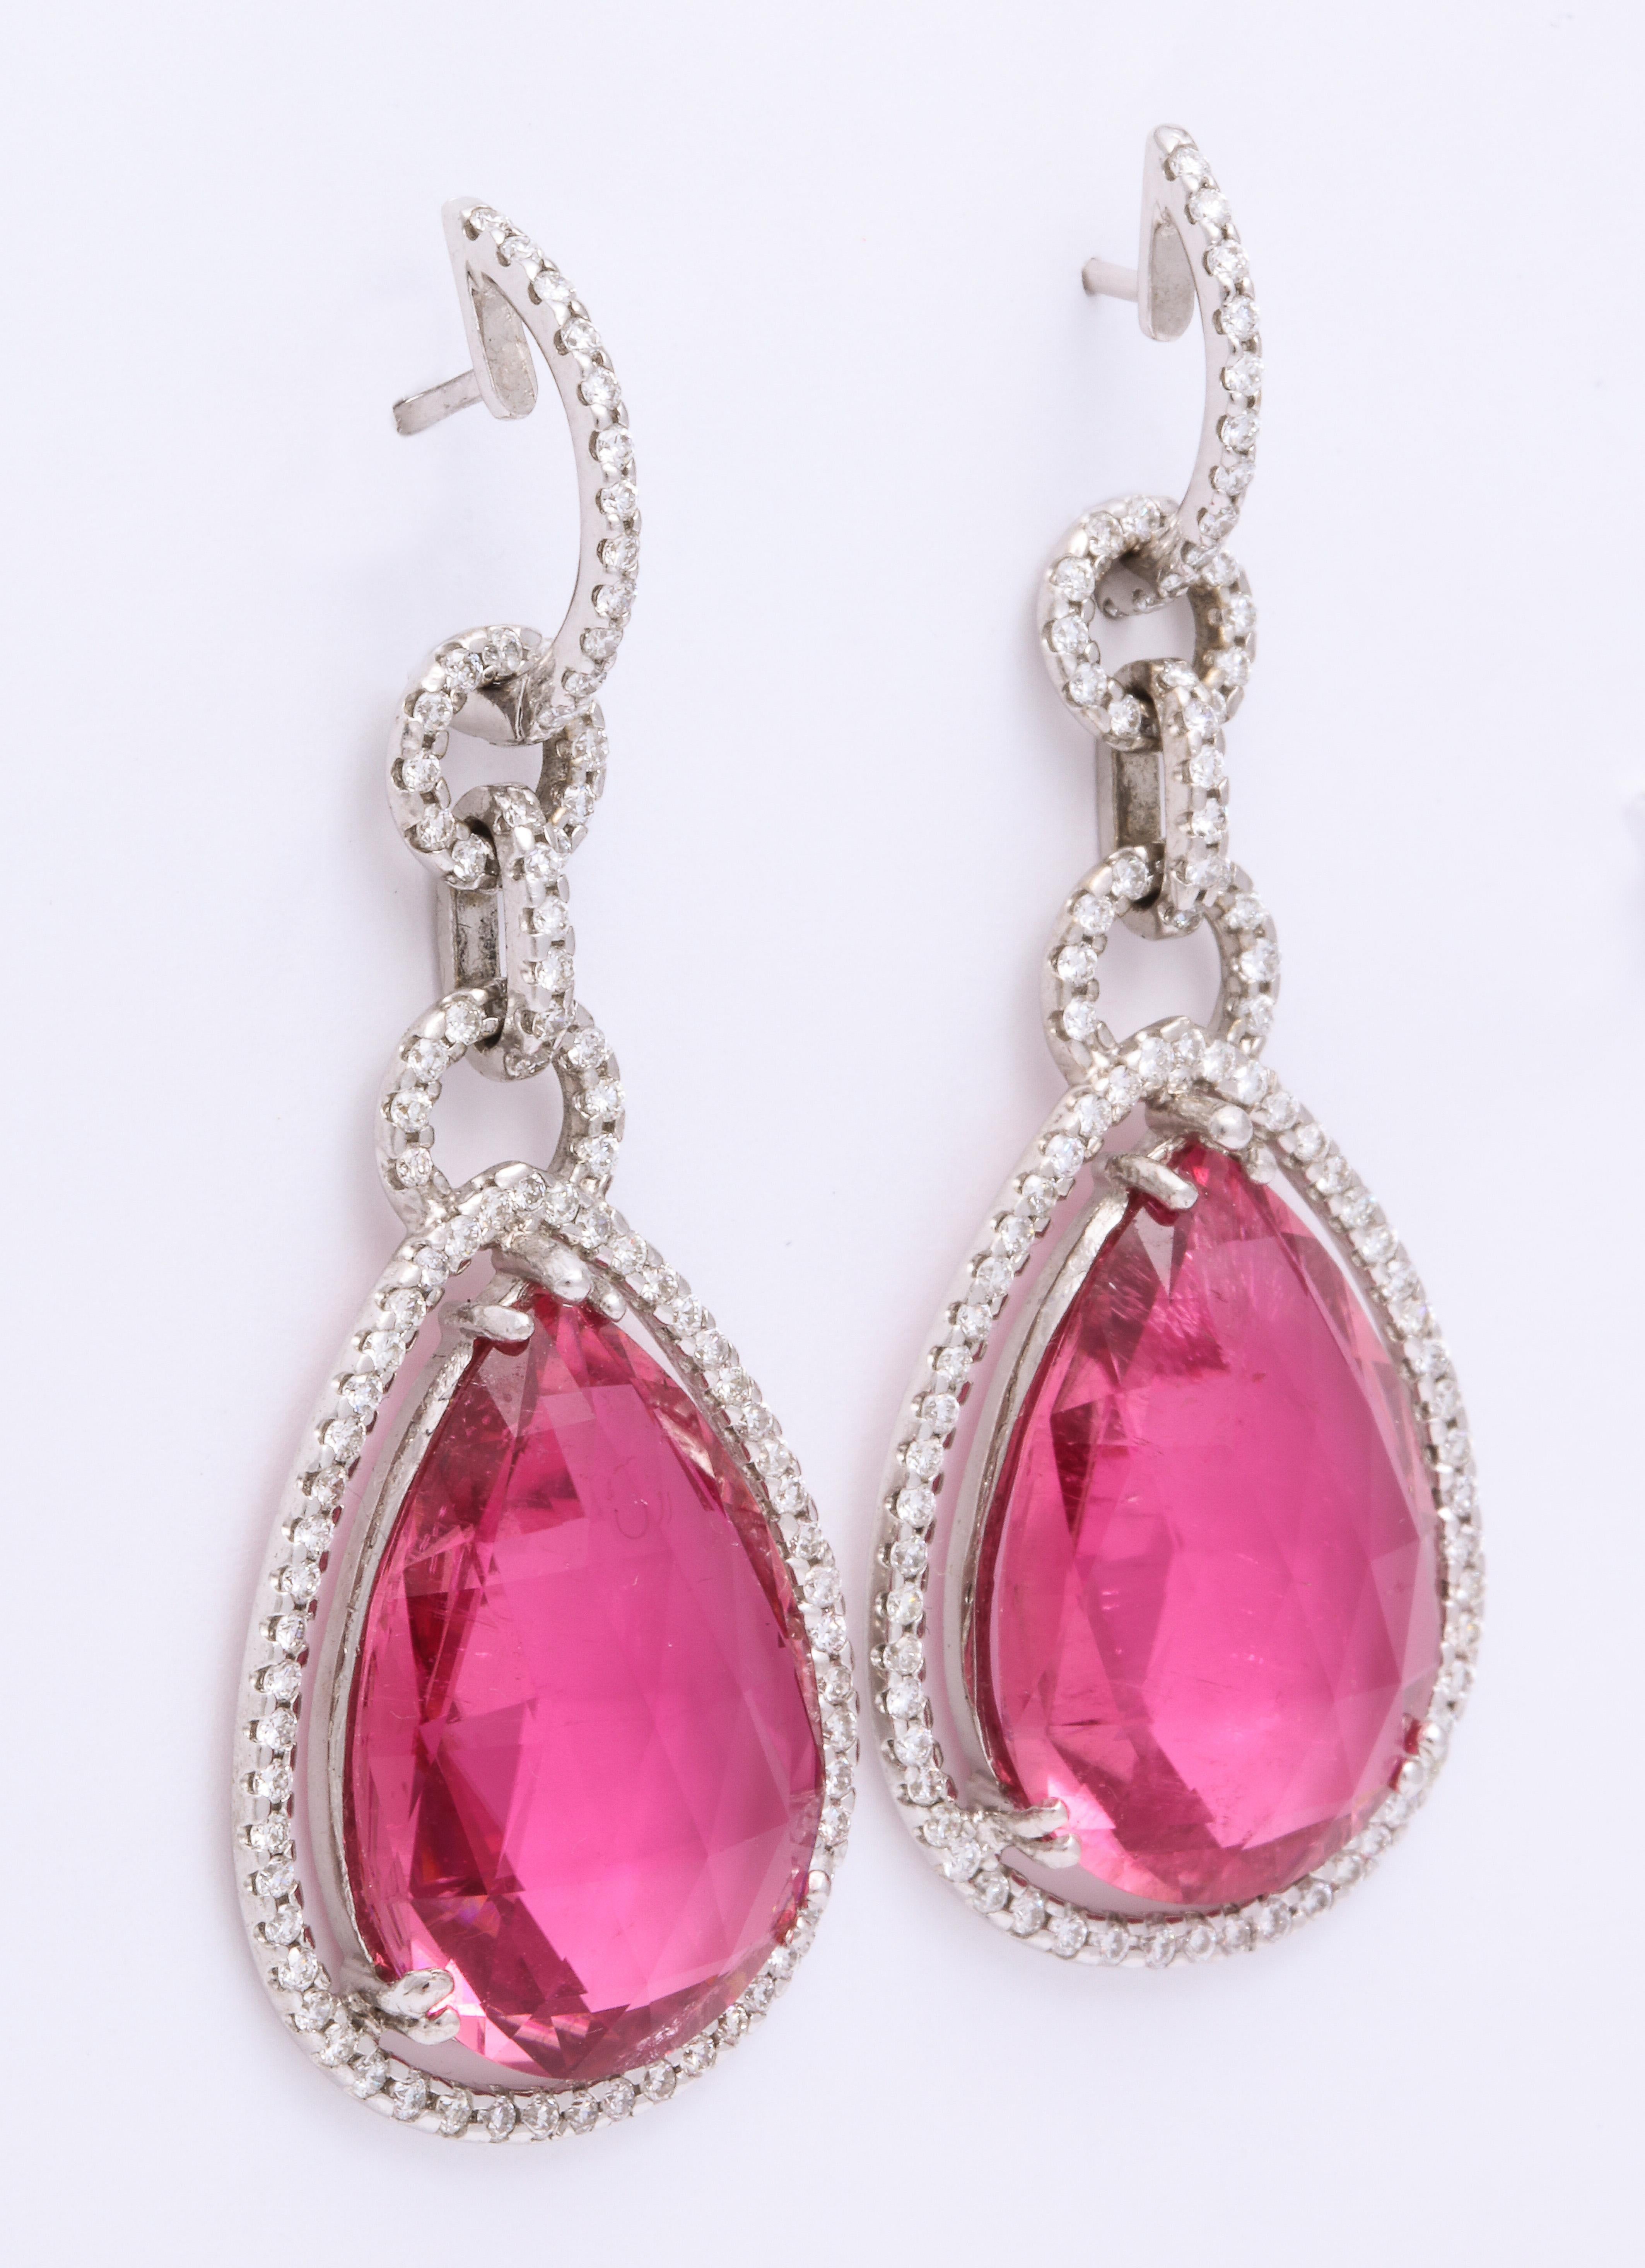 Romantic White Gold, Pear Shaped Pink Tourmaline and Diamond Pendant Earrings For Sale